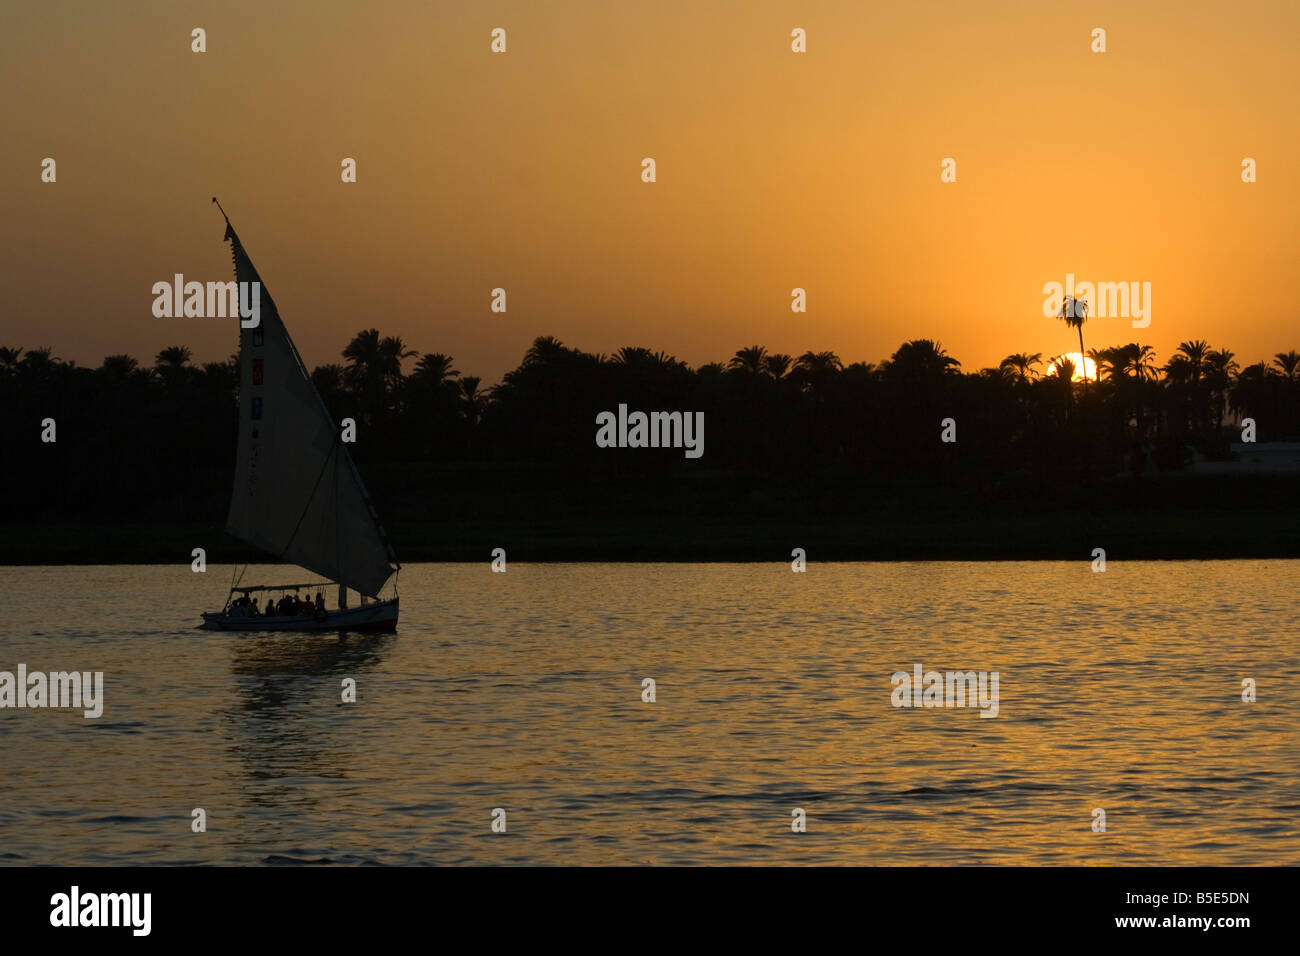 Felucca Sailboat at Sunset on the Nile River in Luxor Egypt Stock Photo